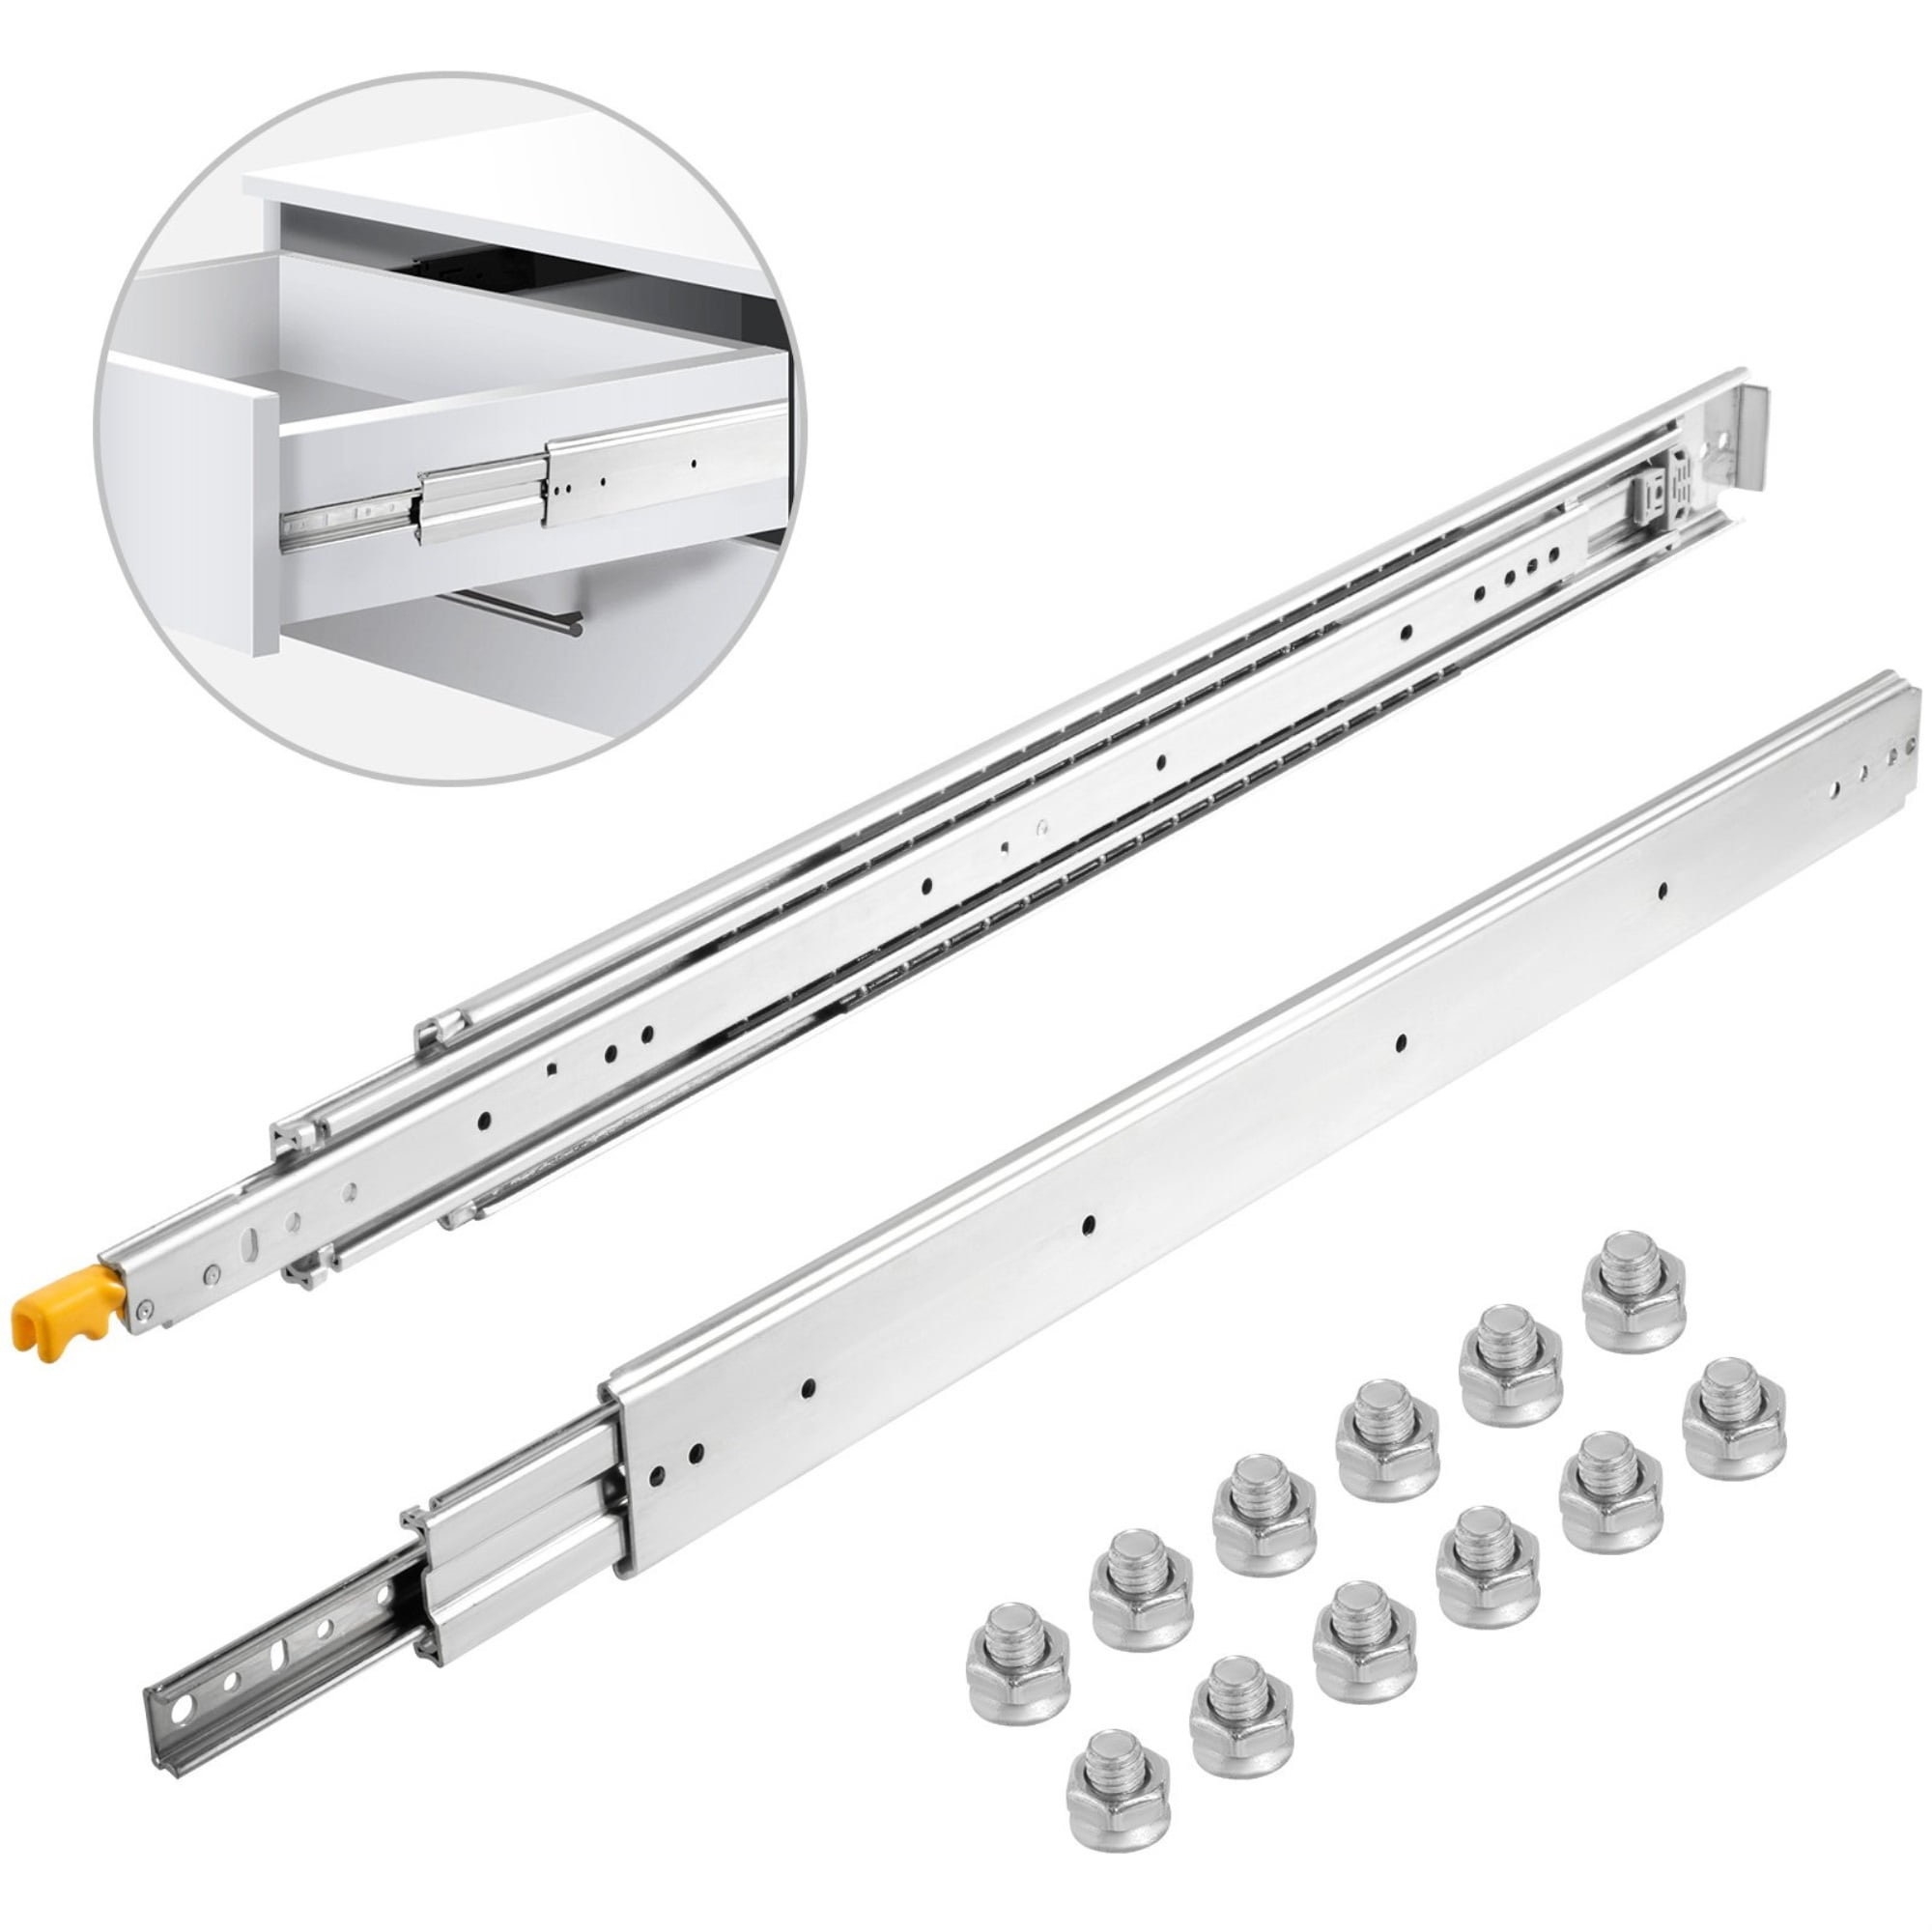 Drawer Slides Bounce Rails Solid Carbon Steel Balls Smoother Drawing Silent The Three-Section Drawer Track Improves The Drawer Space Utilization. 